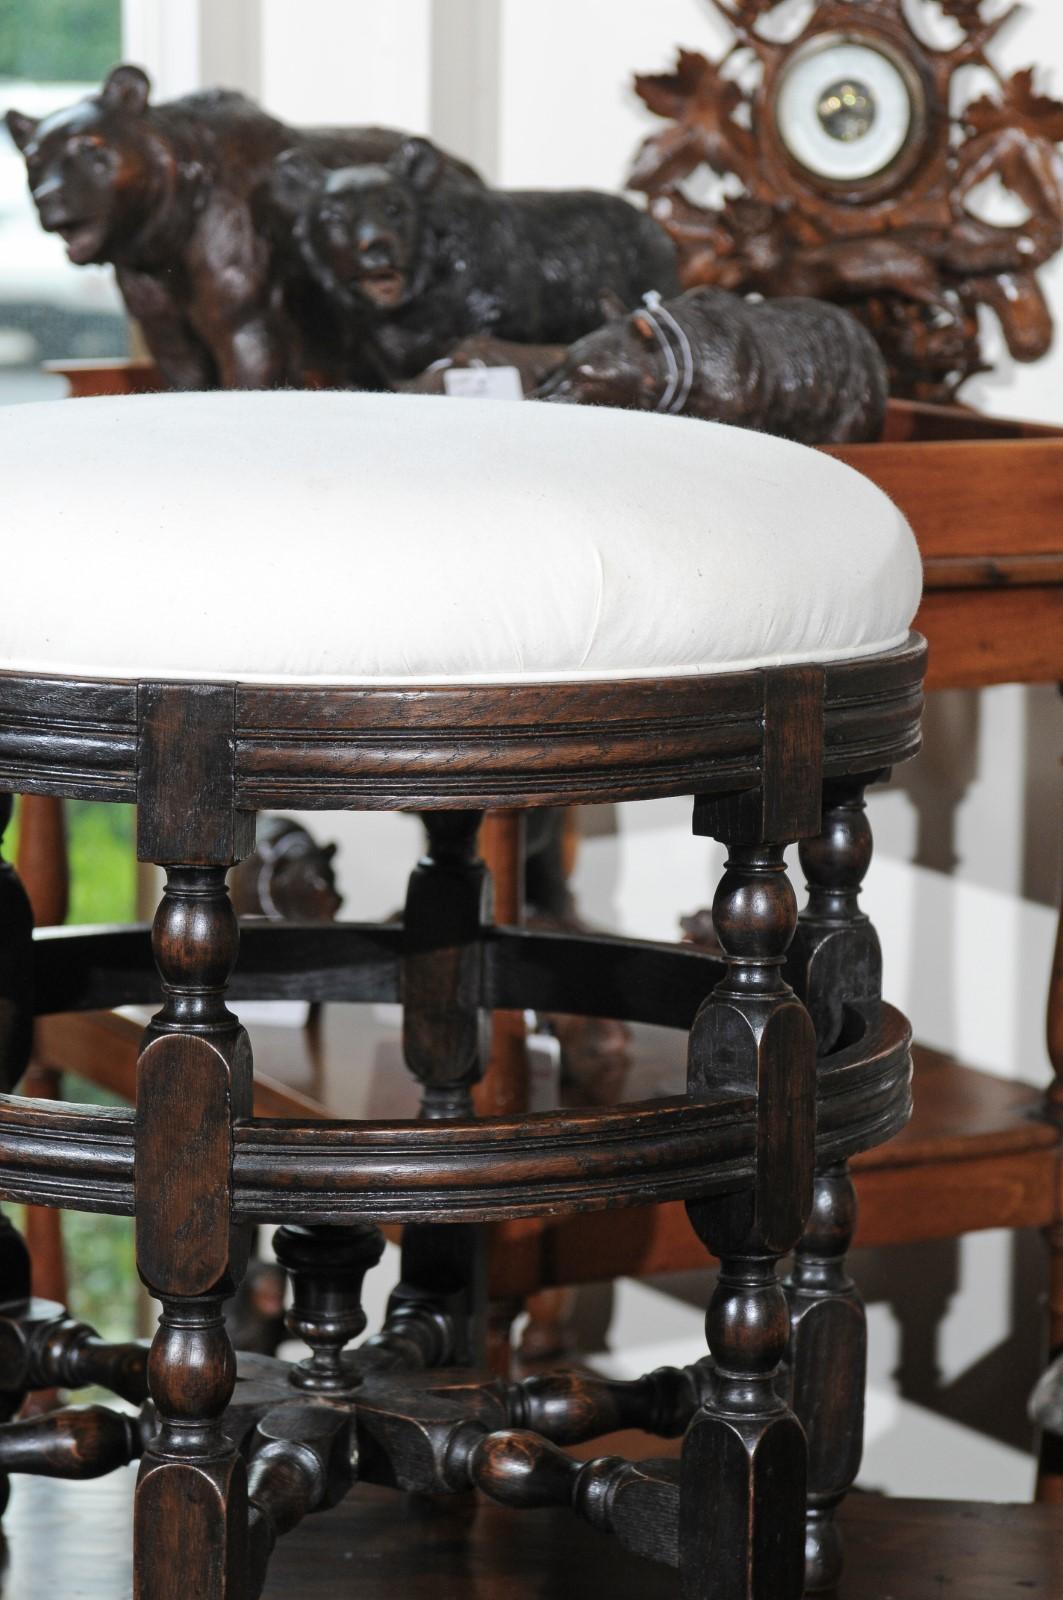 English, 1920s Round Oak Stool with Turned Legs, Dark Patina and New Upholstery 3